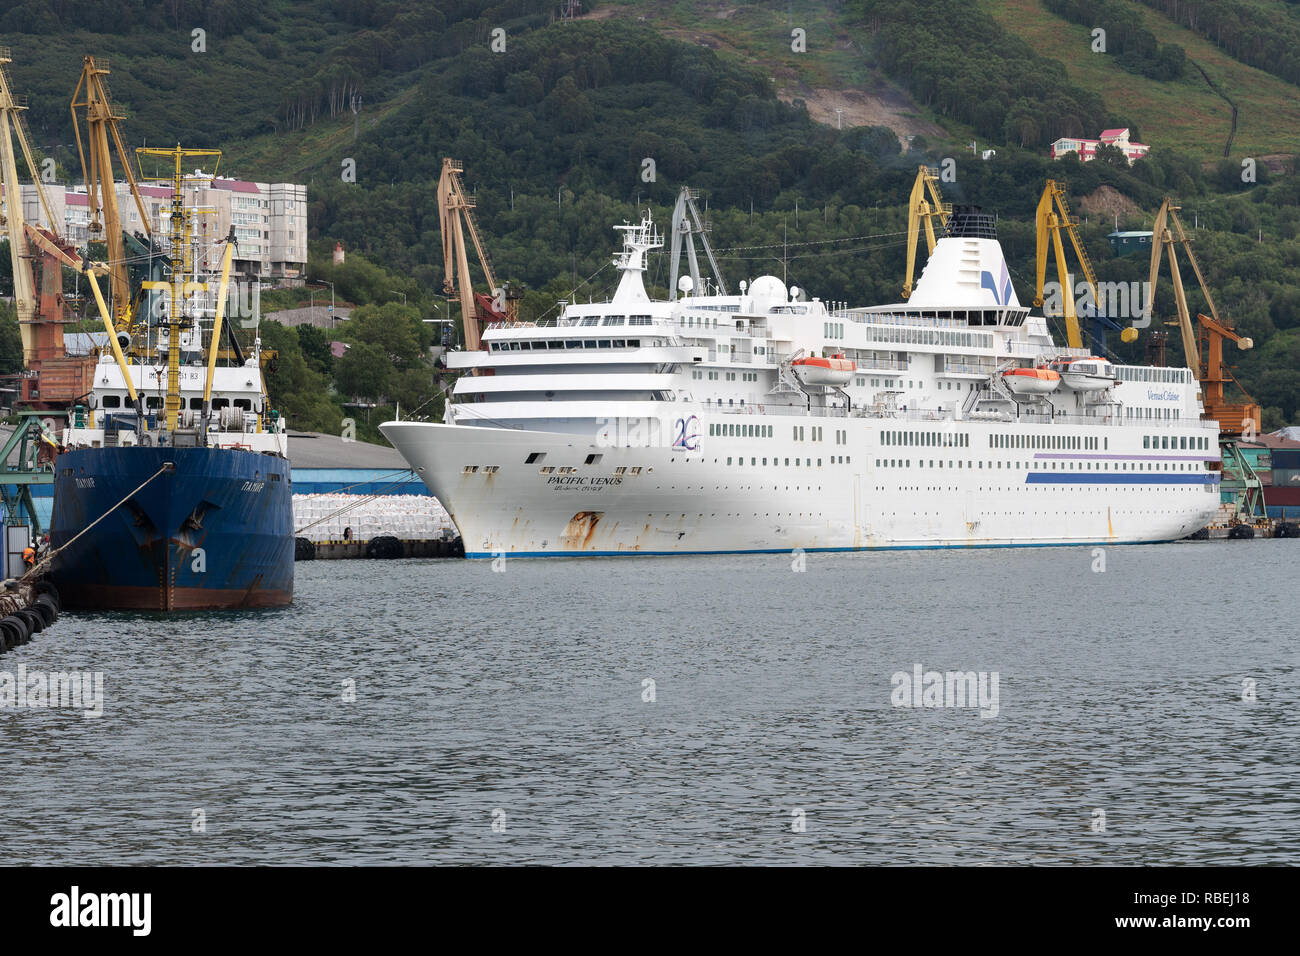 Summer view of Commercial Seaport of Petropavlovsk-Kamchatsky City - Russian fishing vessel Pamir and Japanese cruise liner Pacific Venus Stock Photo